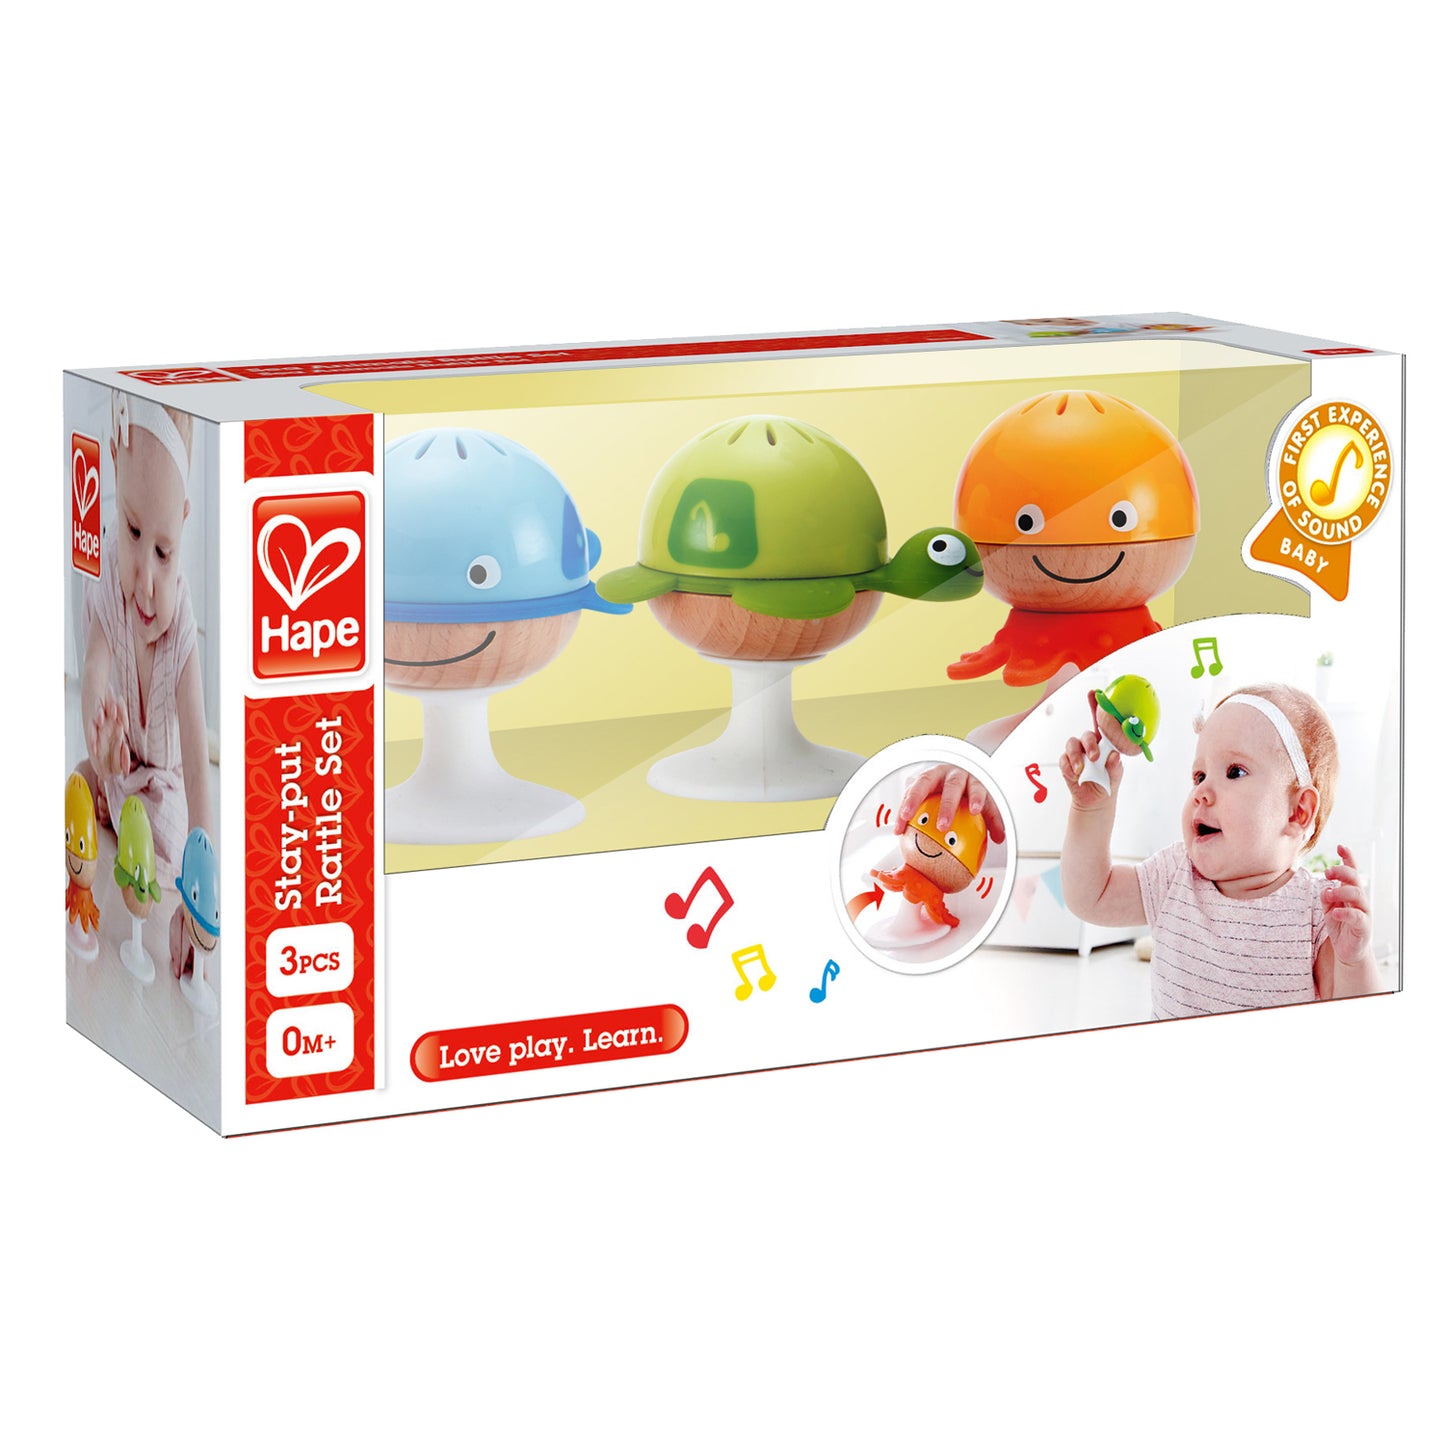 Hape Stay-put Rattle SetEngaging Sea Animal Suction Rattles for Early Development